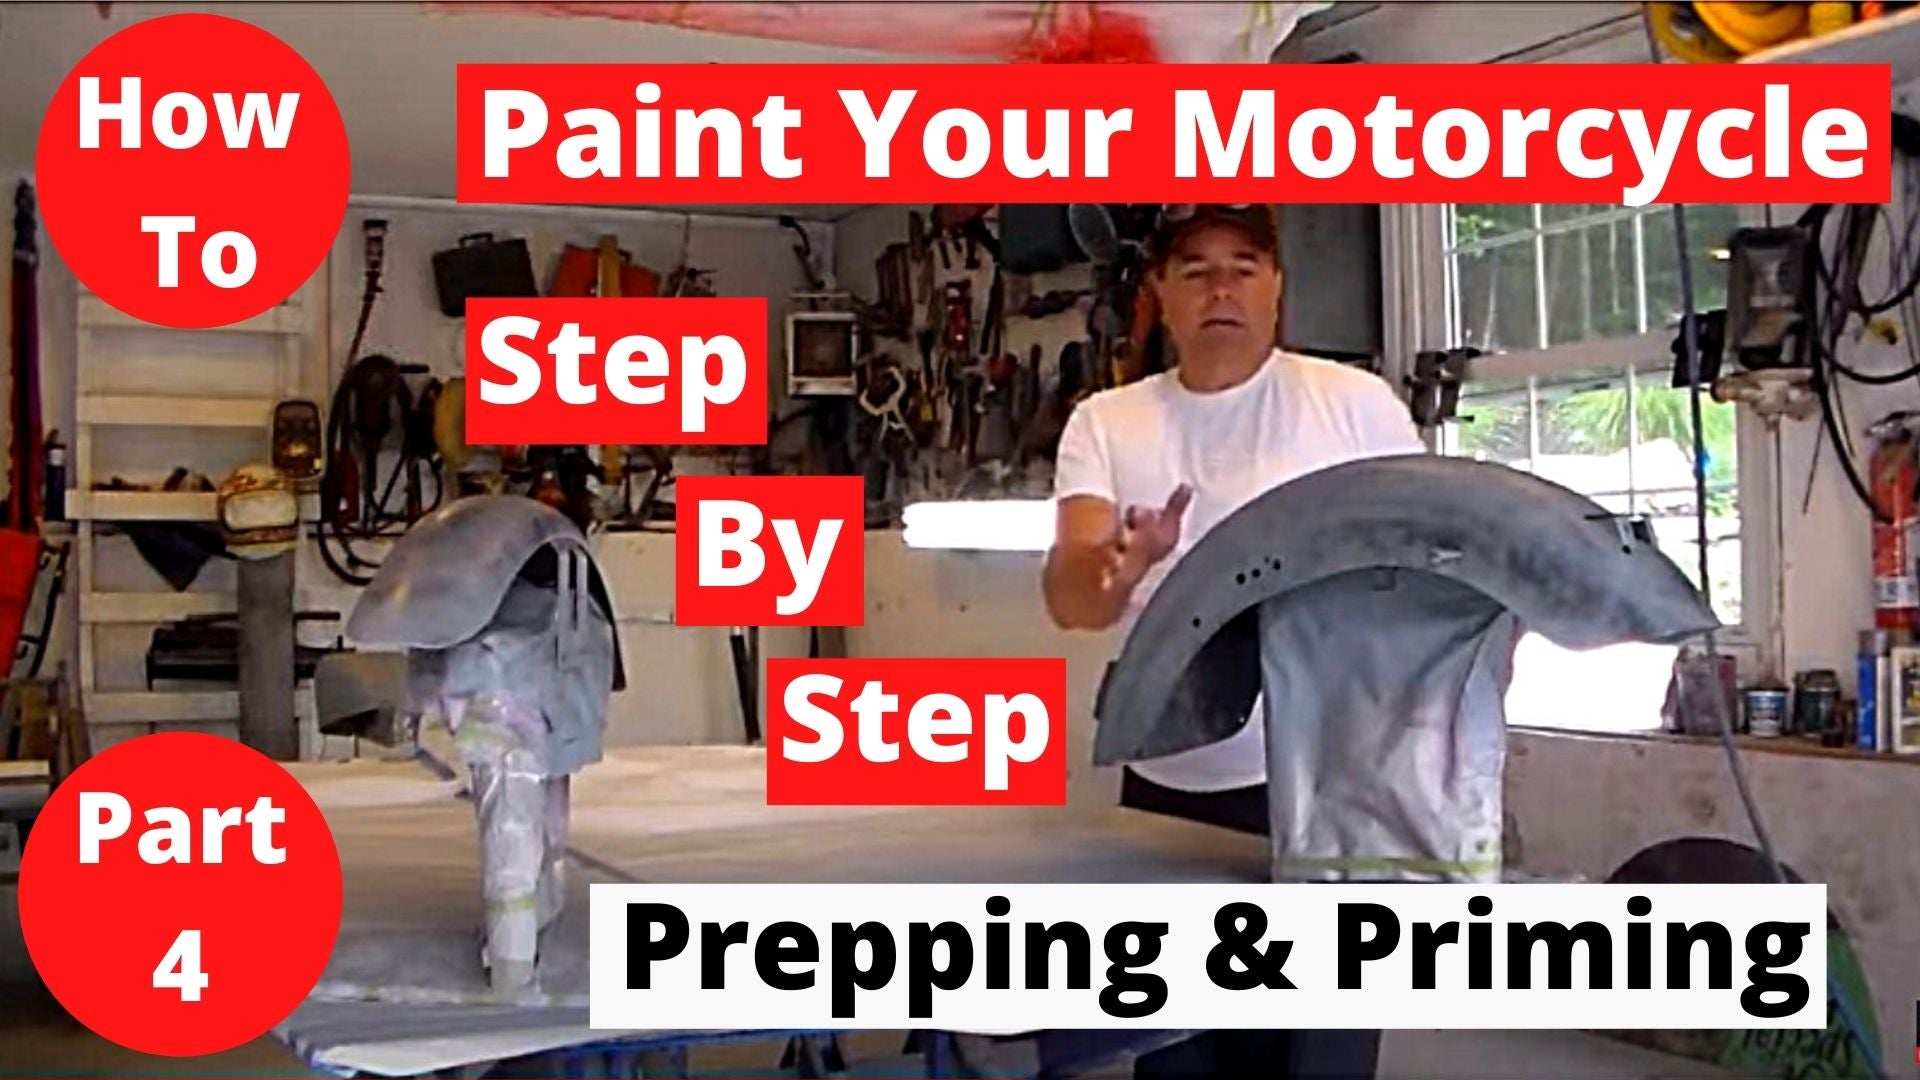 How To Paint Your Motorcycle Step By Step Part 4 Priming & Prepping for Paint